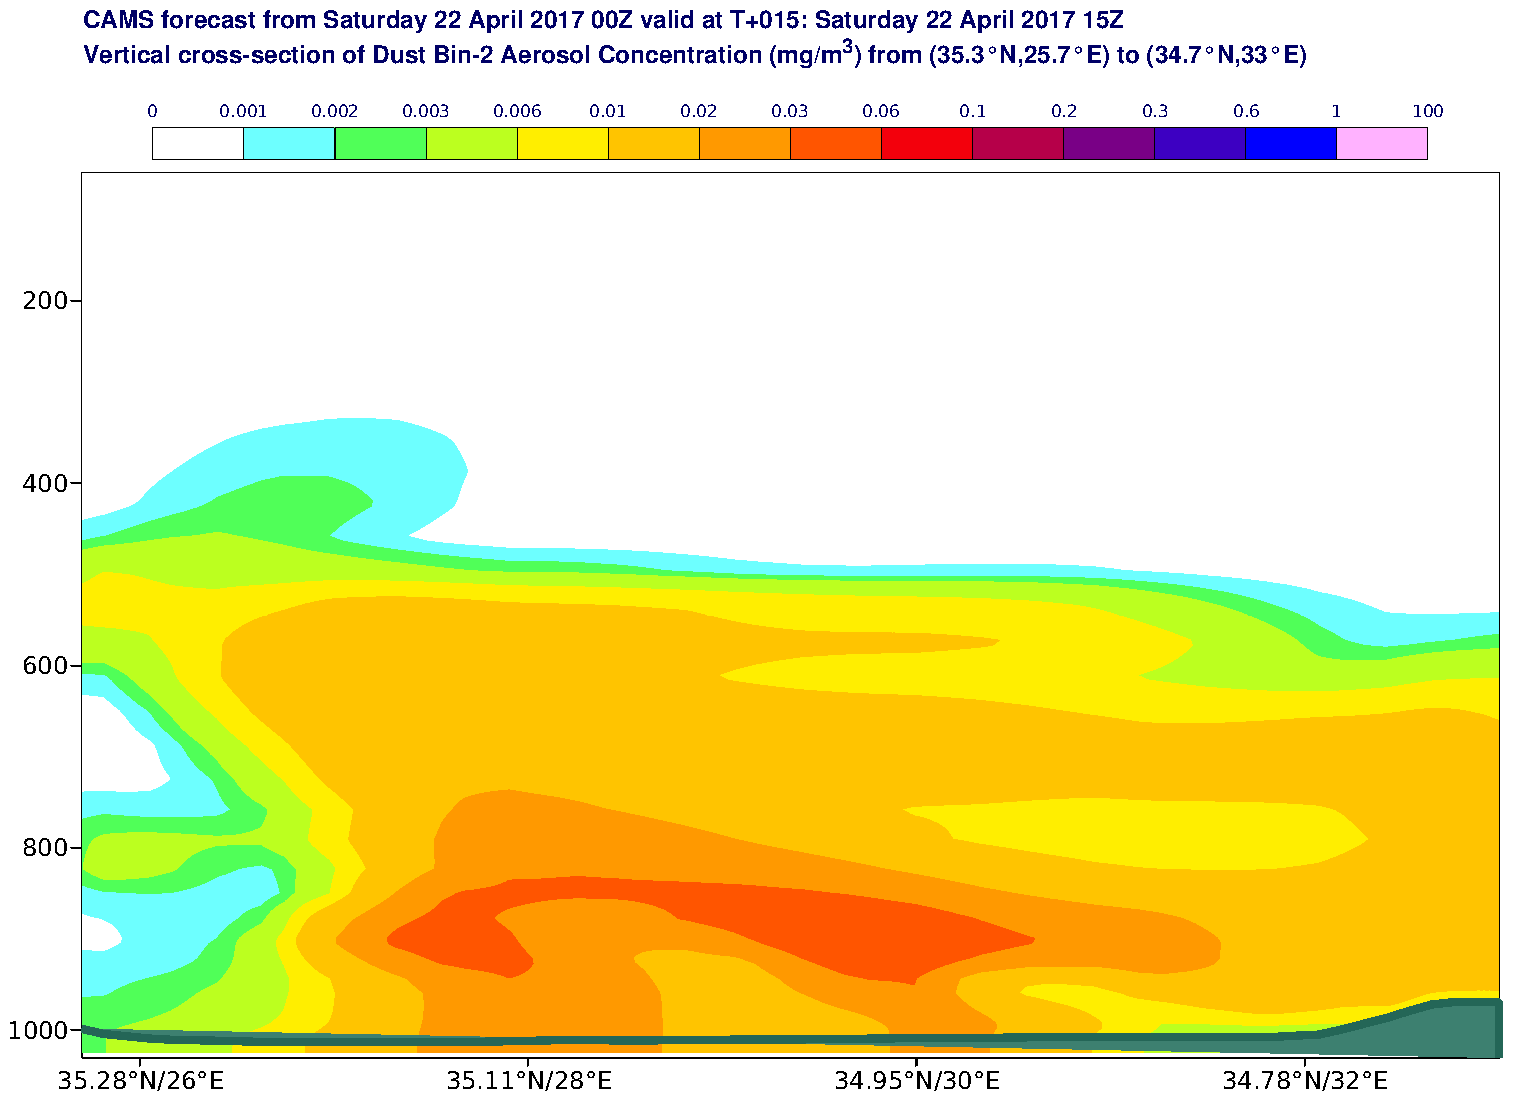 Vertical cross-section of Dust Bin-2 Aerosol Concentration (mg/m3) valid at T15 - 2017-04-22 15:00